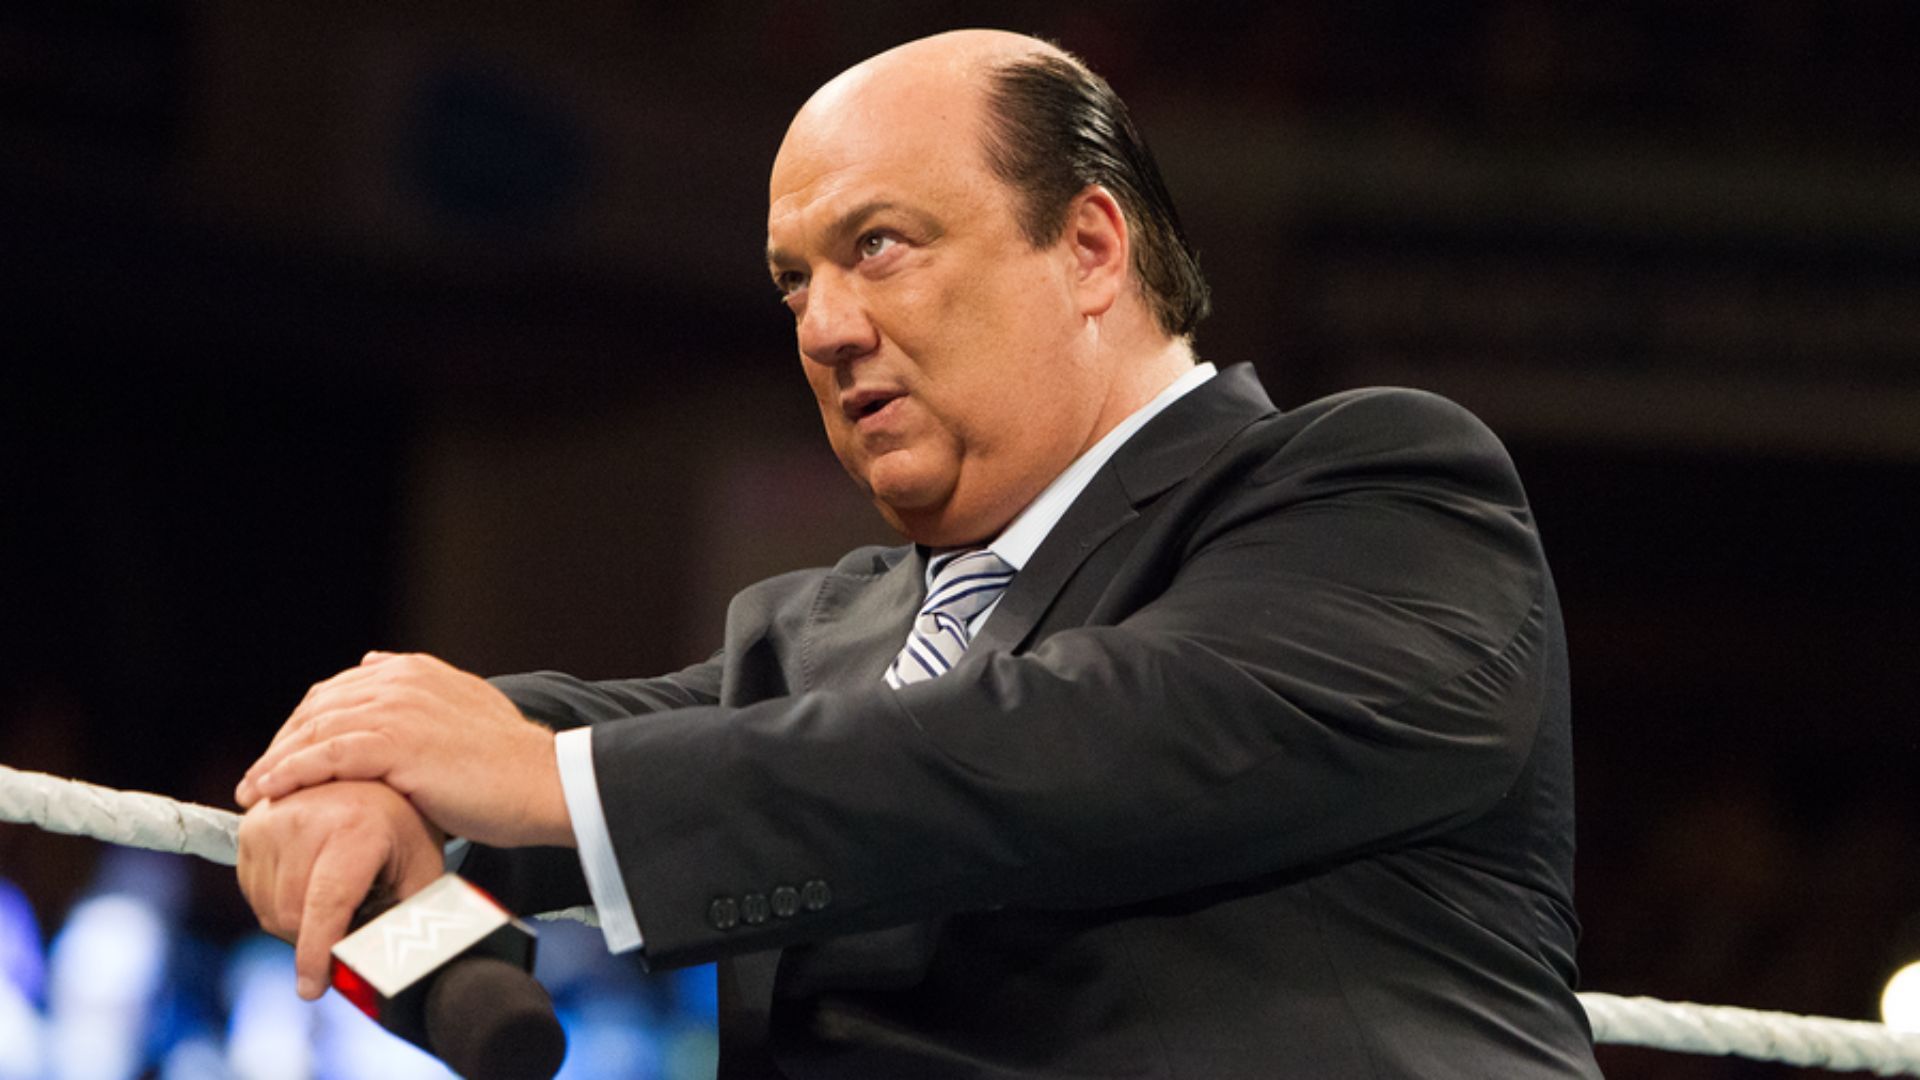 Paul Heyman will be inducted into the WWE Hall of Fame in 2024